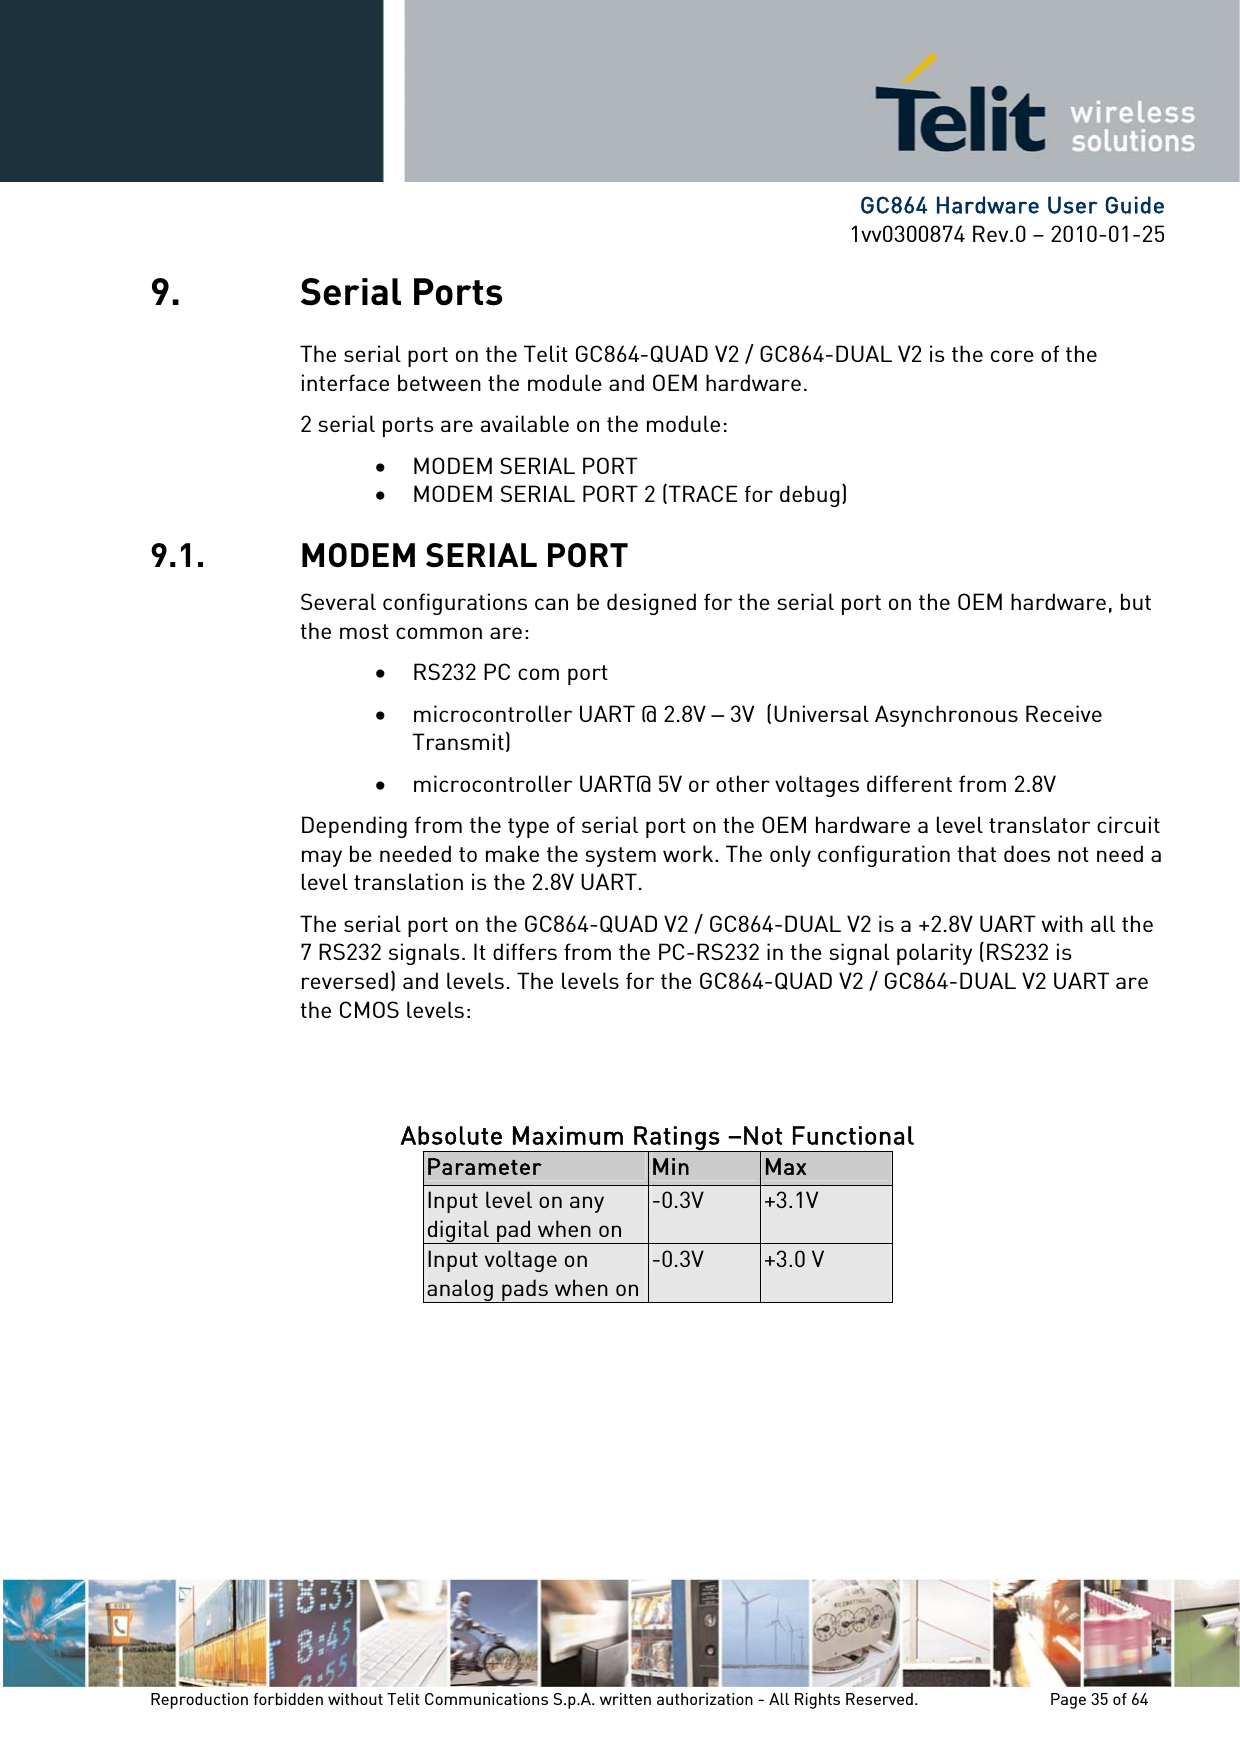      GC864 Hardware User Guide 1vv0300874 Rev.0 – 2010-01-25 Reproduction forbidden without Telit Communications S.p.A. written authorization - All Rights Reserved.    Page 35 of 64  9. Serial Ports The serial port on the Telit GC864-QUAD V2 / GC864-DUAL V2 is the core of the interface between the module and OEM hardware.  2 serial ports are available on the module: • MODEM SERIAL PORT • MODEM SERIAL PORT 2 (TRACE for debug) 9.1. MODEM SERIAL PORT Several configurations can be designed for the serial port on the OEM hardware, but the most common are: • RS232 PC com port • microcontroller UART @ 2.8V – 3V  (Universal Asynchronous Receive Transmit)  • microcontroller UART@ 5V or other voltages different from 2.8V  Depending from the type of serial port on the OEM hardware a level translator circuit may be needed to make the system work. The only configuration that does not need a level translation is the 2.8V UART. The serial port on the GC864-QUAD V2 / GC864-DUAL V2 is a +2.8V UART with all the 7 RS232 signals. It differs from the PC-RS232 in the signal polarity (RS232 is reversed) and levels. The levels for the GC864-QUAD V2 / GC864-DUAL V2 UART are the CMOS levels:   Absolute Maximum Ratings –Not Functional Parameter  Min  Max Input level on any digital pad when on -0.3V  +3.1V Input voltage on analog pads when on-0.3V  +3.0 V         